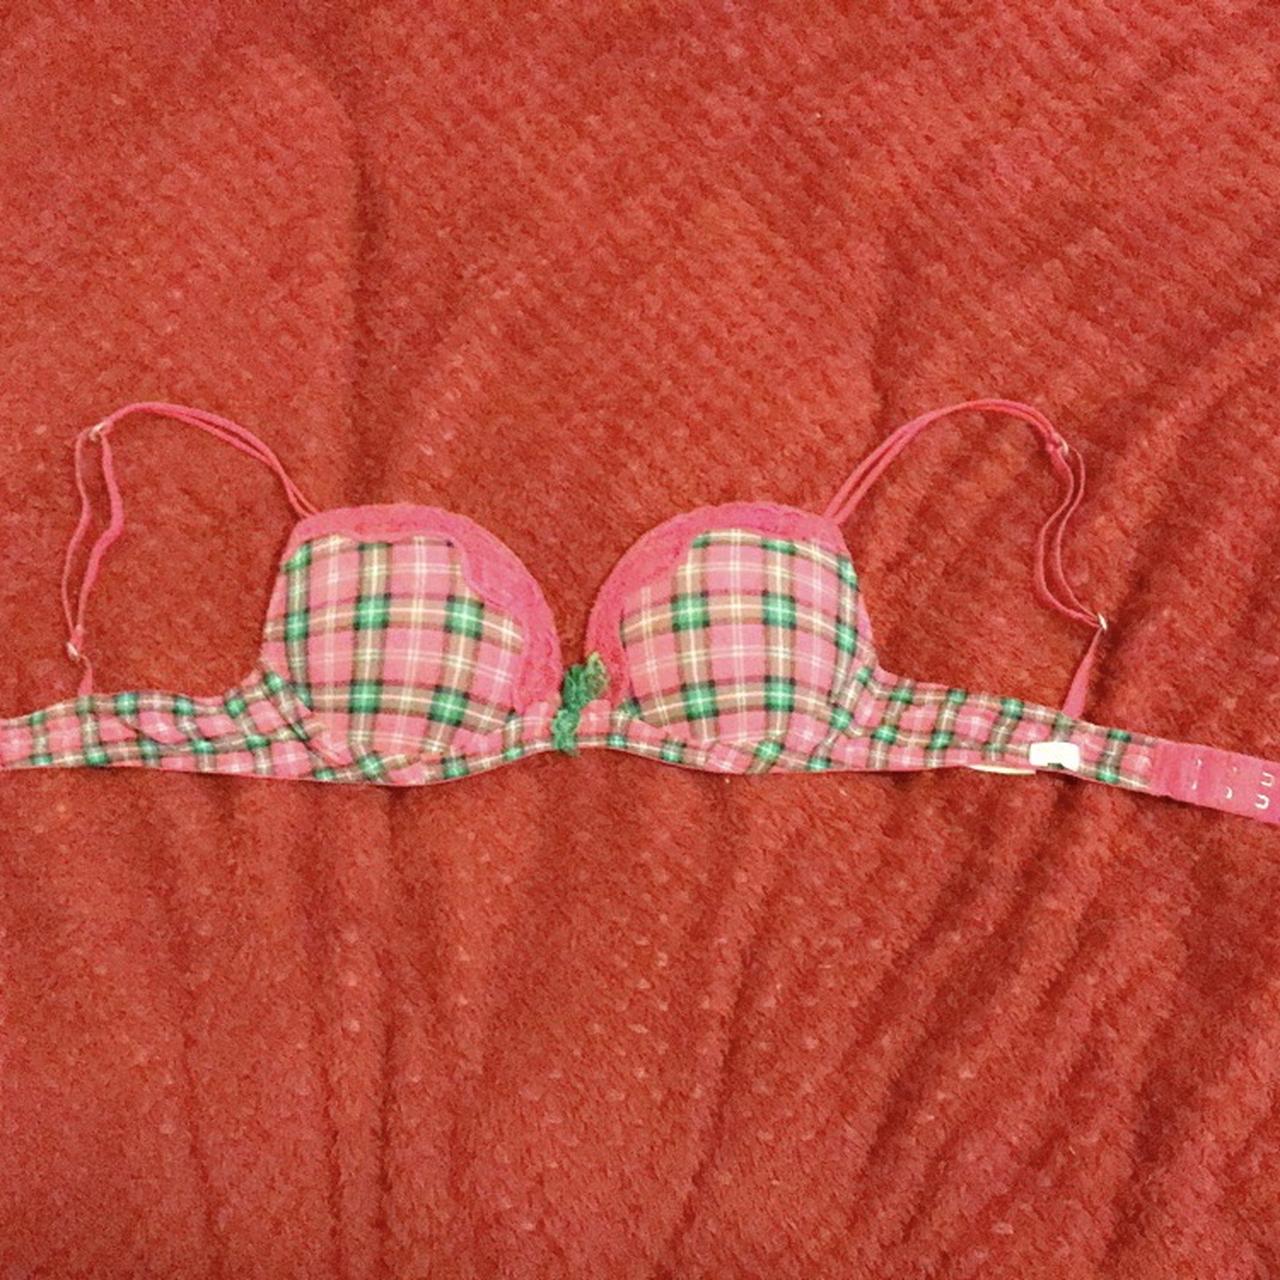 Beaut pink bra with green and pink plaid pattern - Depop